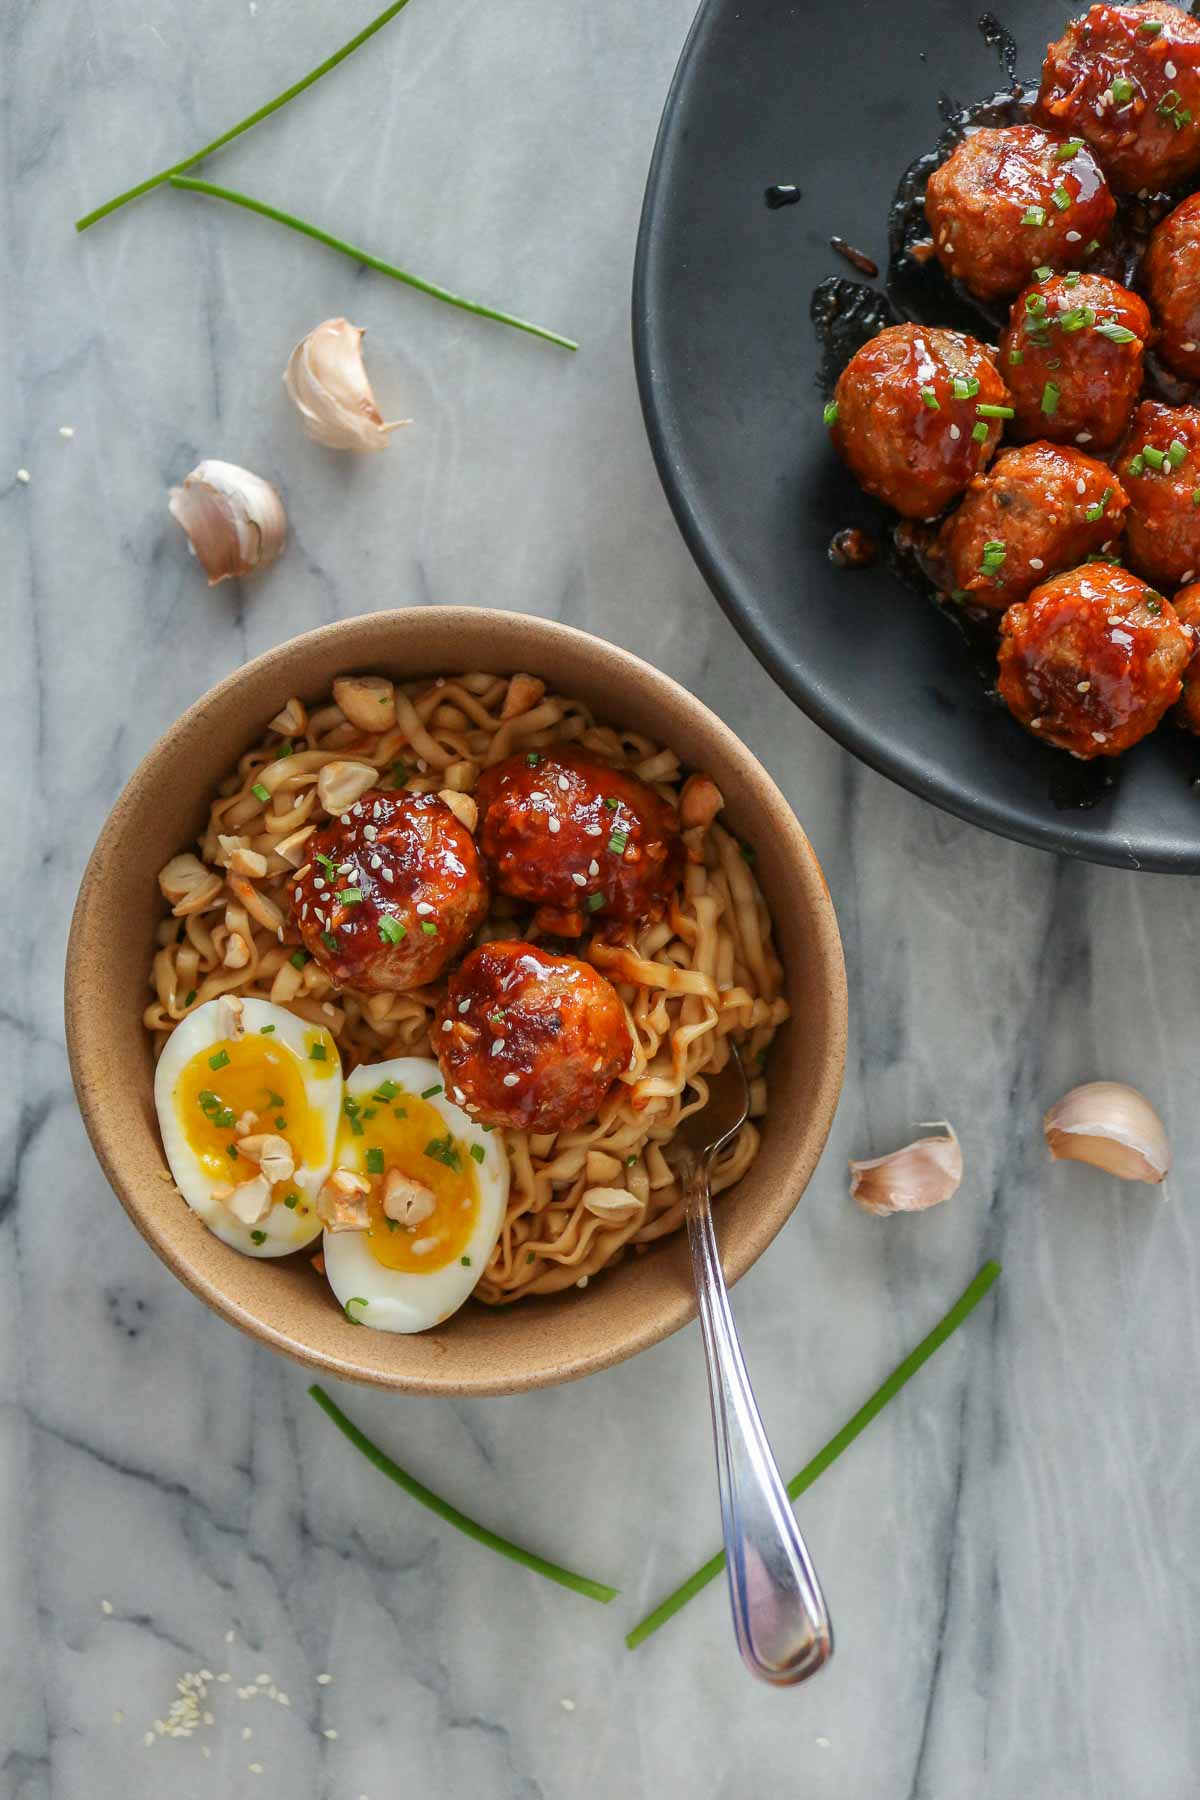 Meatballs, noodles and a jammy soft-boiled egg in a bowl alongside a platter of meatballs.